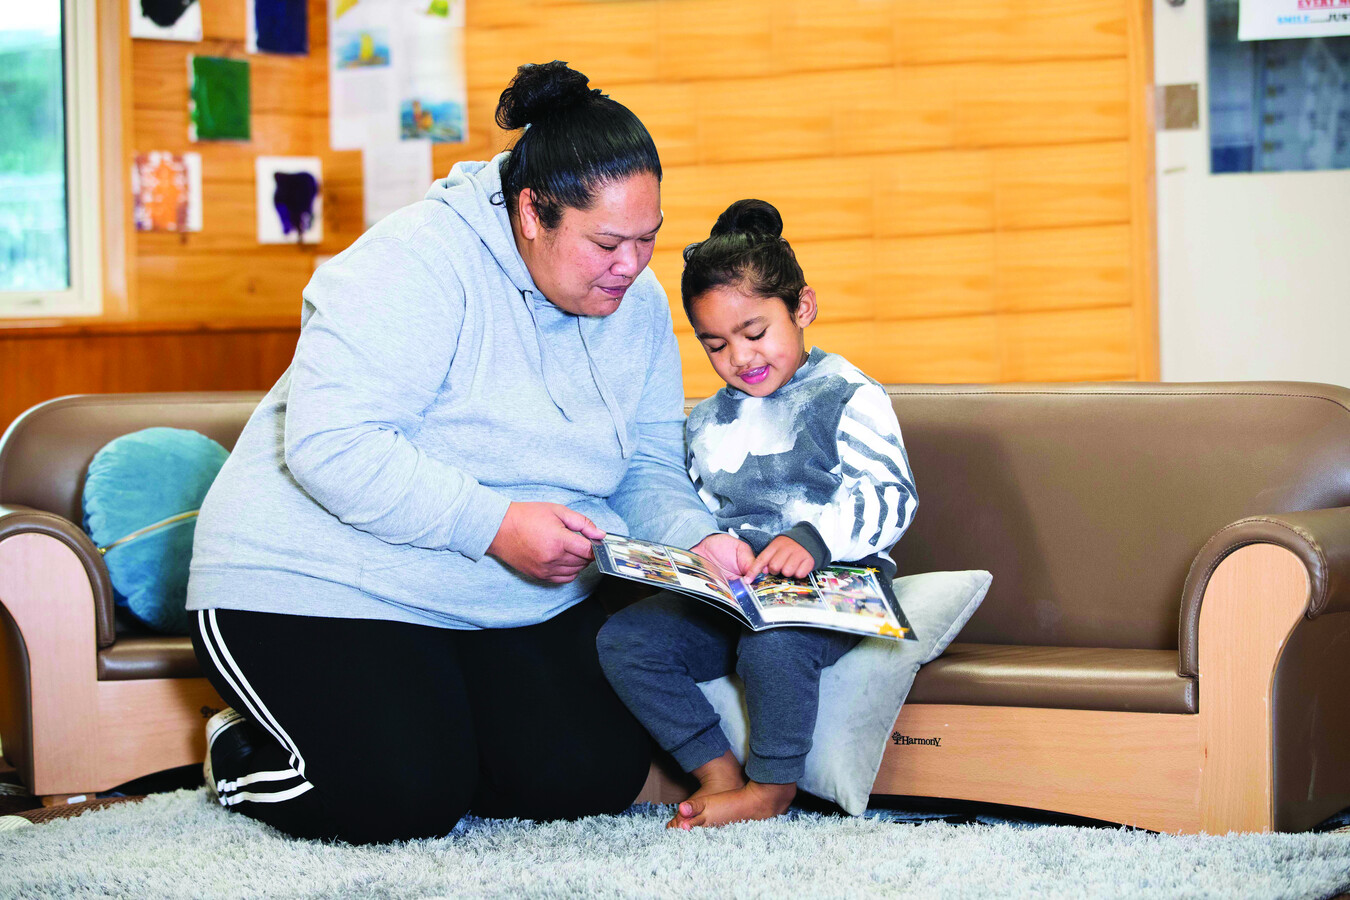 A Samoan mother and her young child reading a picture book together on the couch.